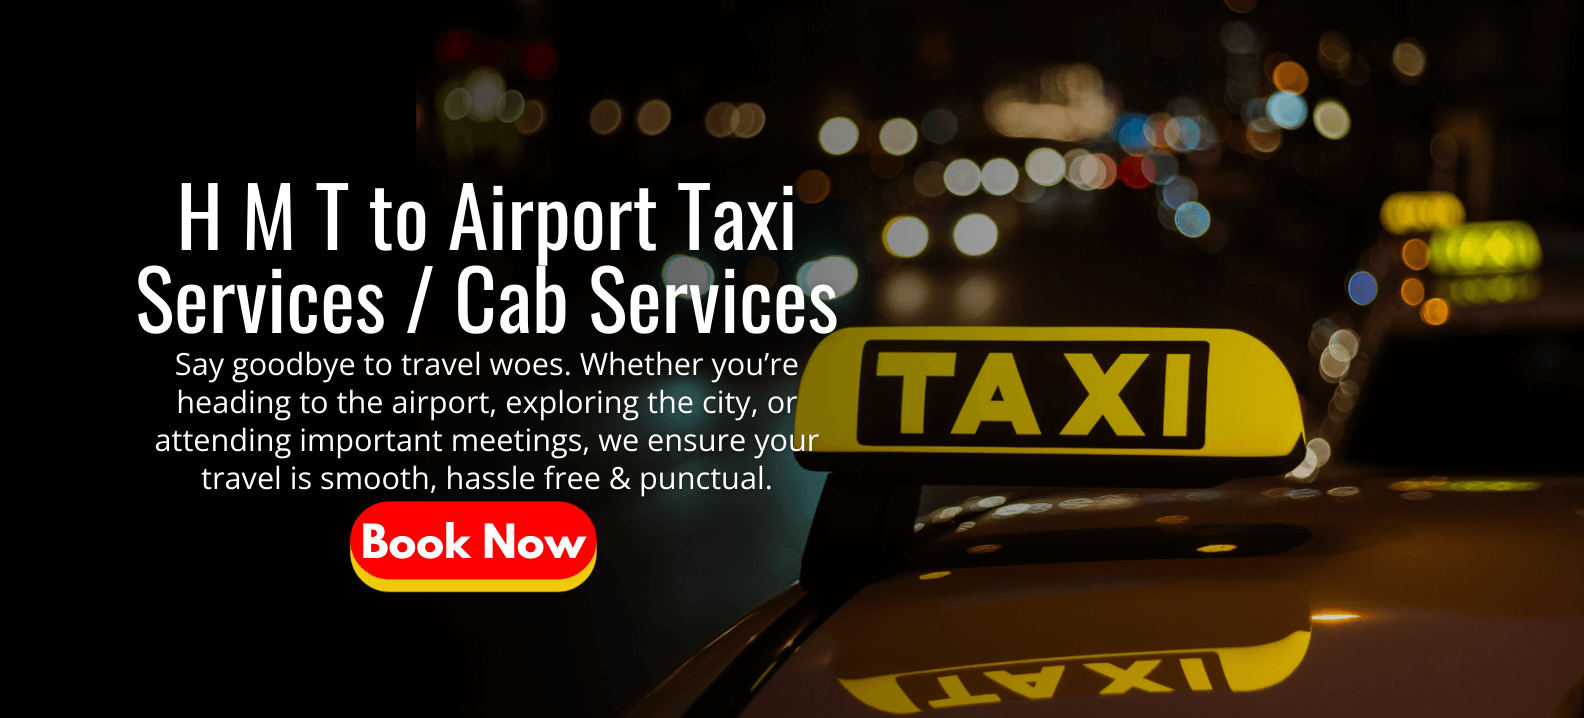 H M T to Airport Taxi Services _ Cab Services